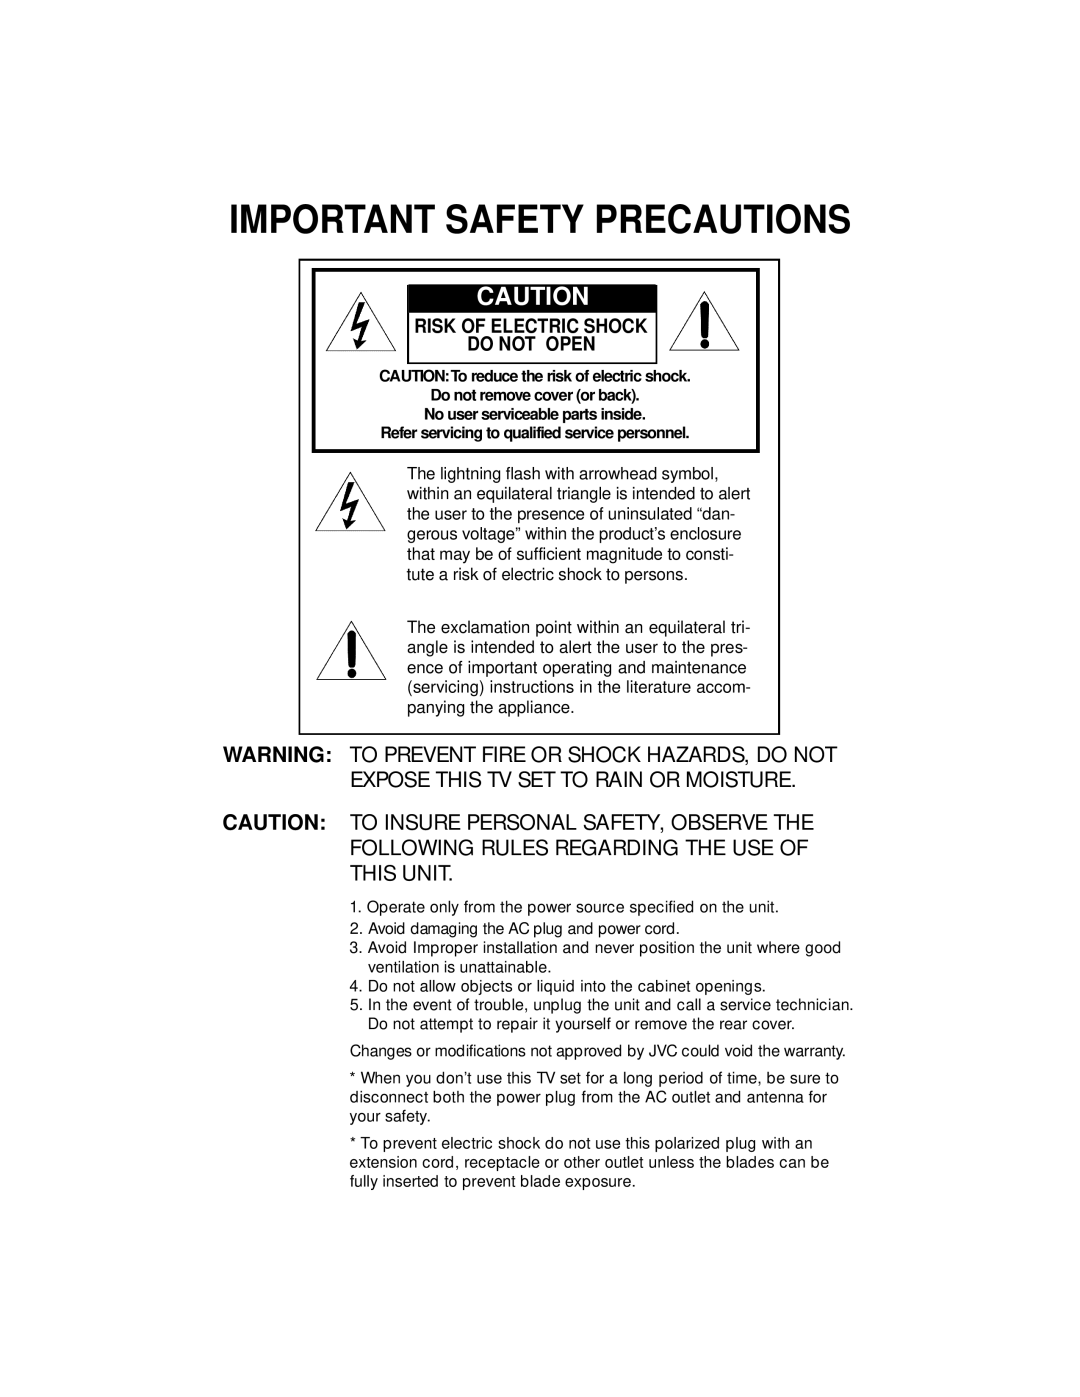 JVC AV 36D302, AV 36D202, AV 36D502, AV 32D302, AV 32D502 Important Safety Precautions, Risk Of Electric Shock Do Not Open 